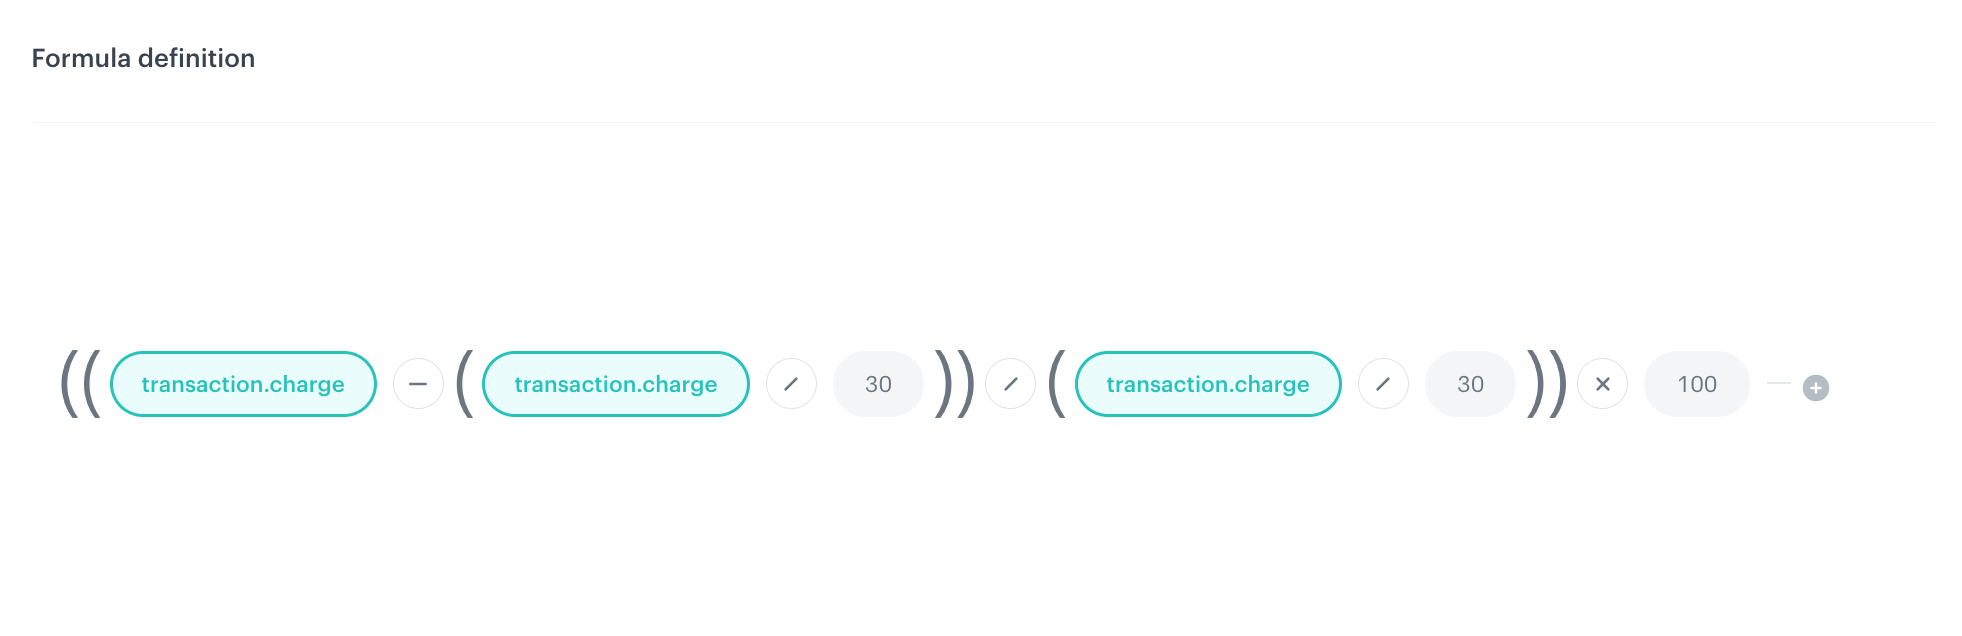 Configuration of the metric which counts the change in transactions